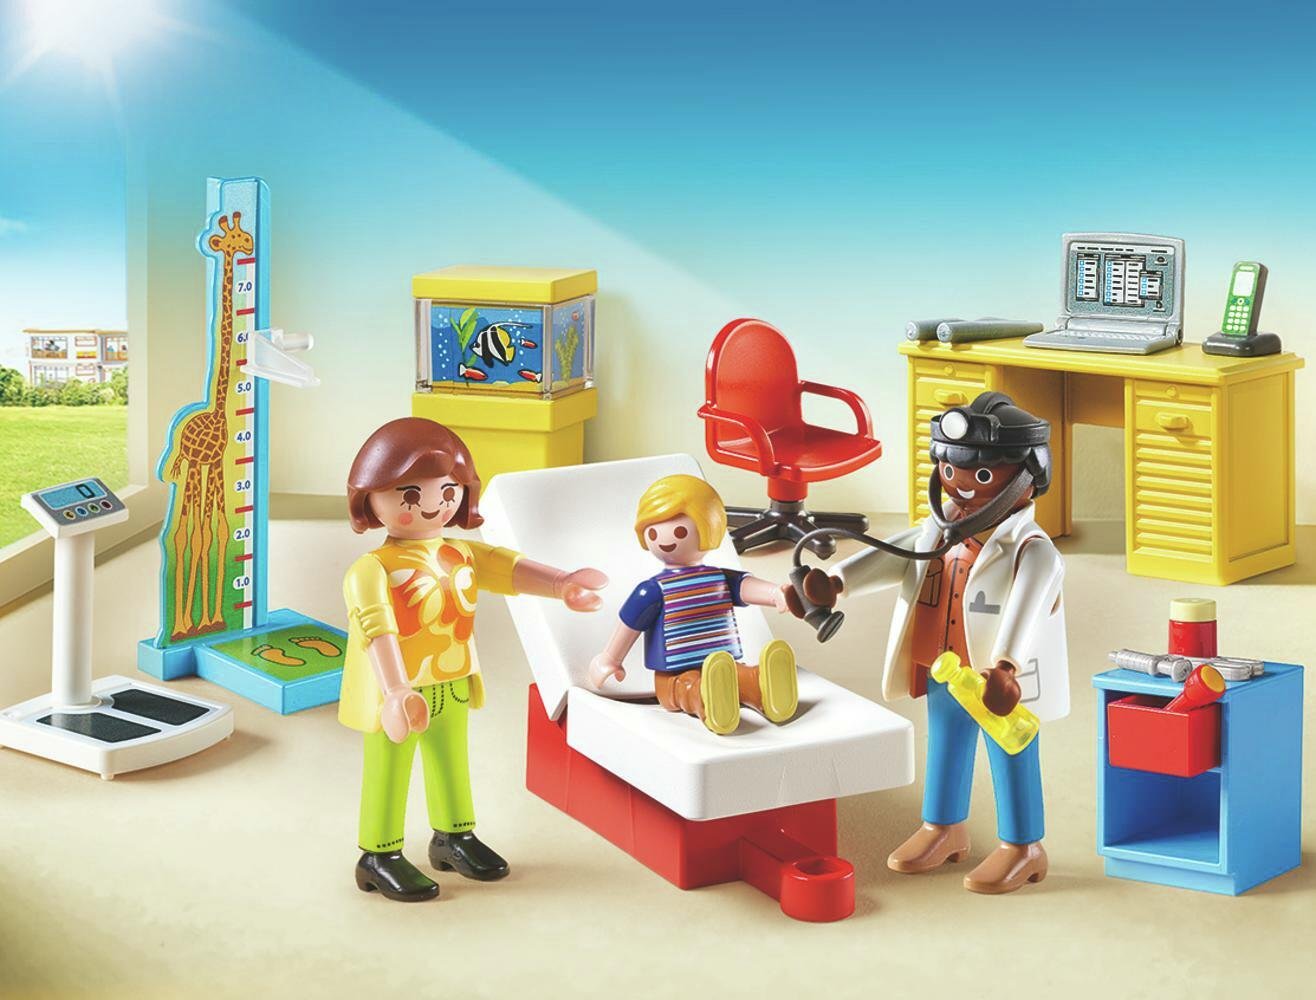 Playmobil 70034 Starter Pack Review